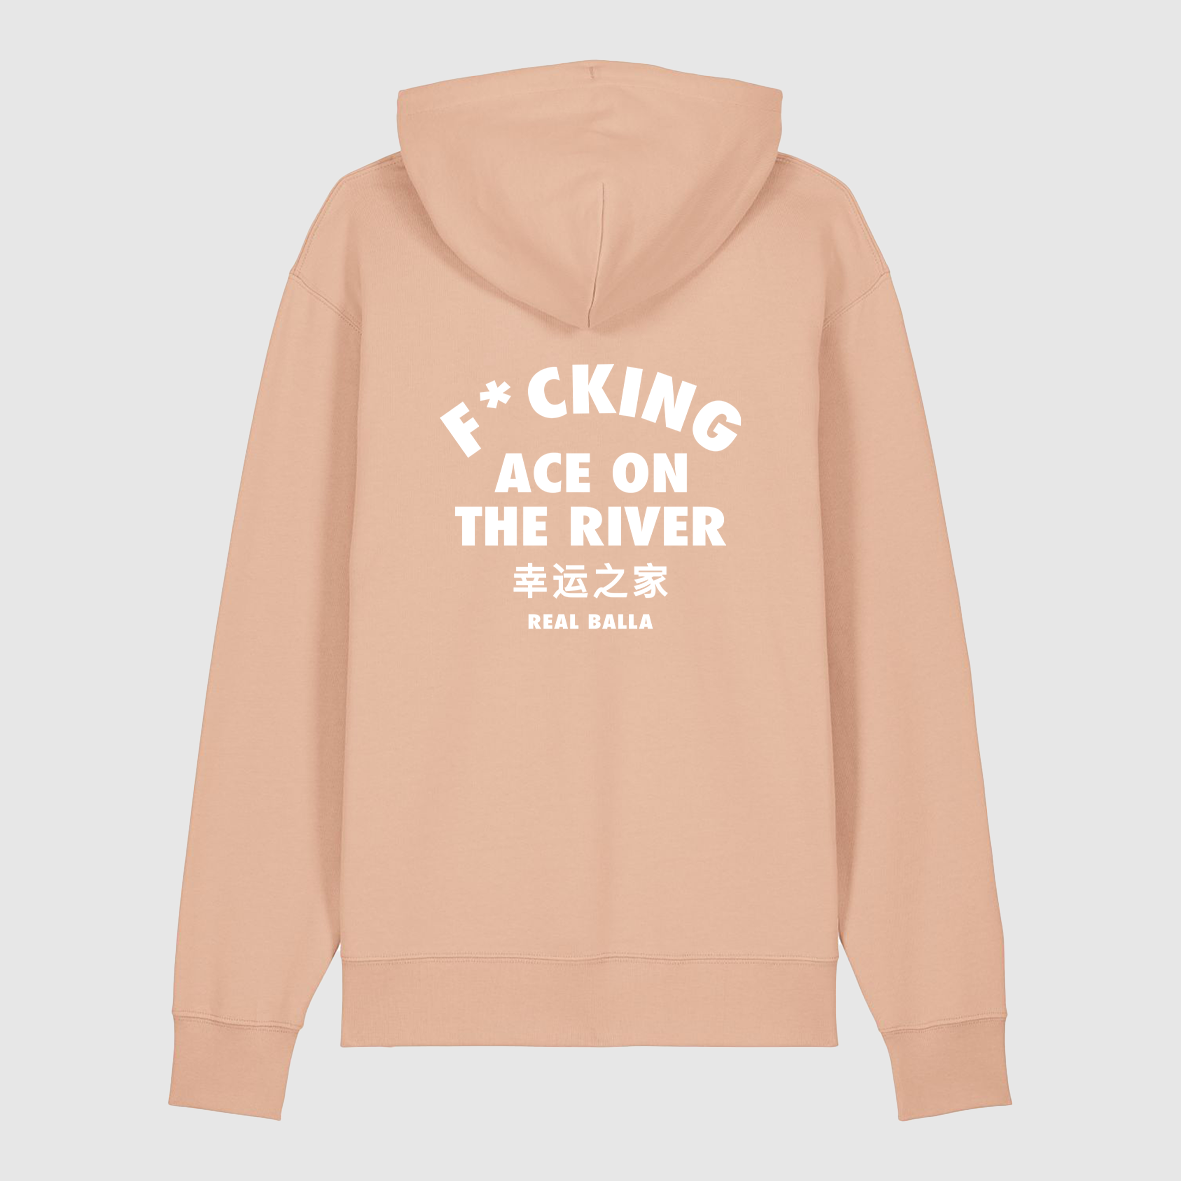 Hoodie F*cking ace on the river - Noir